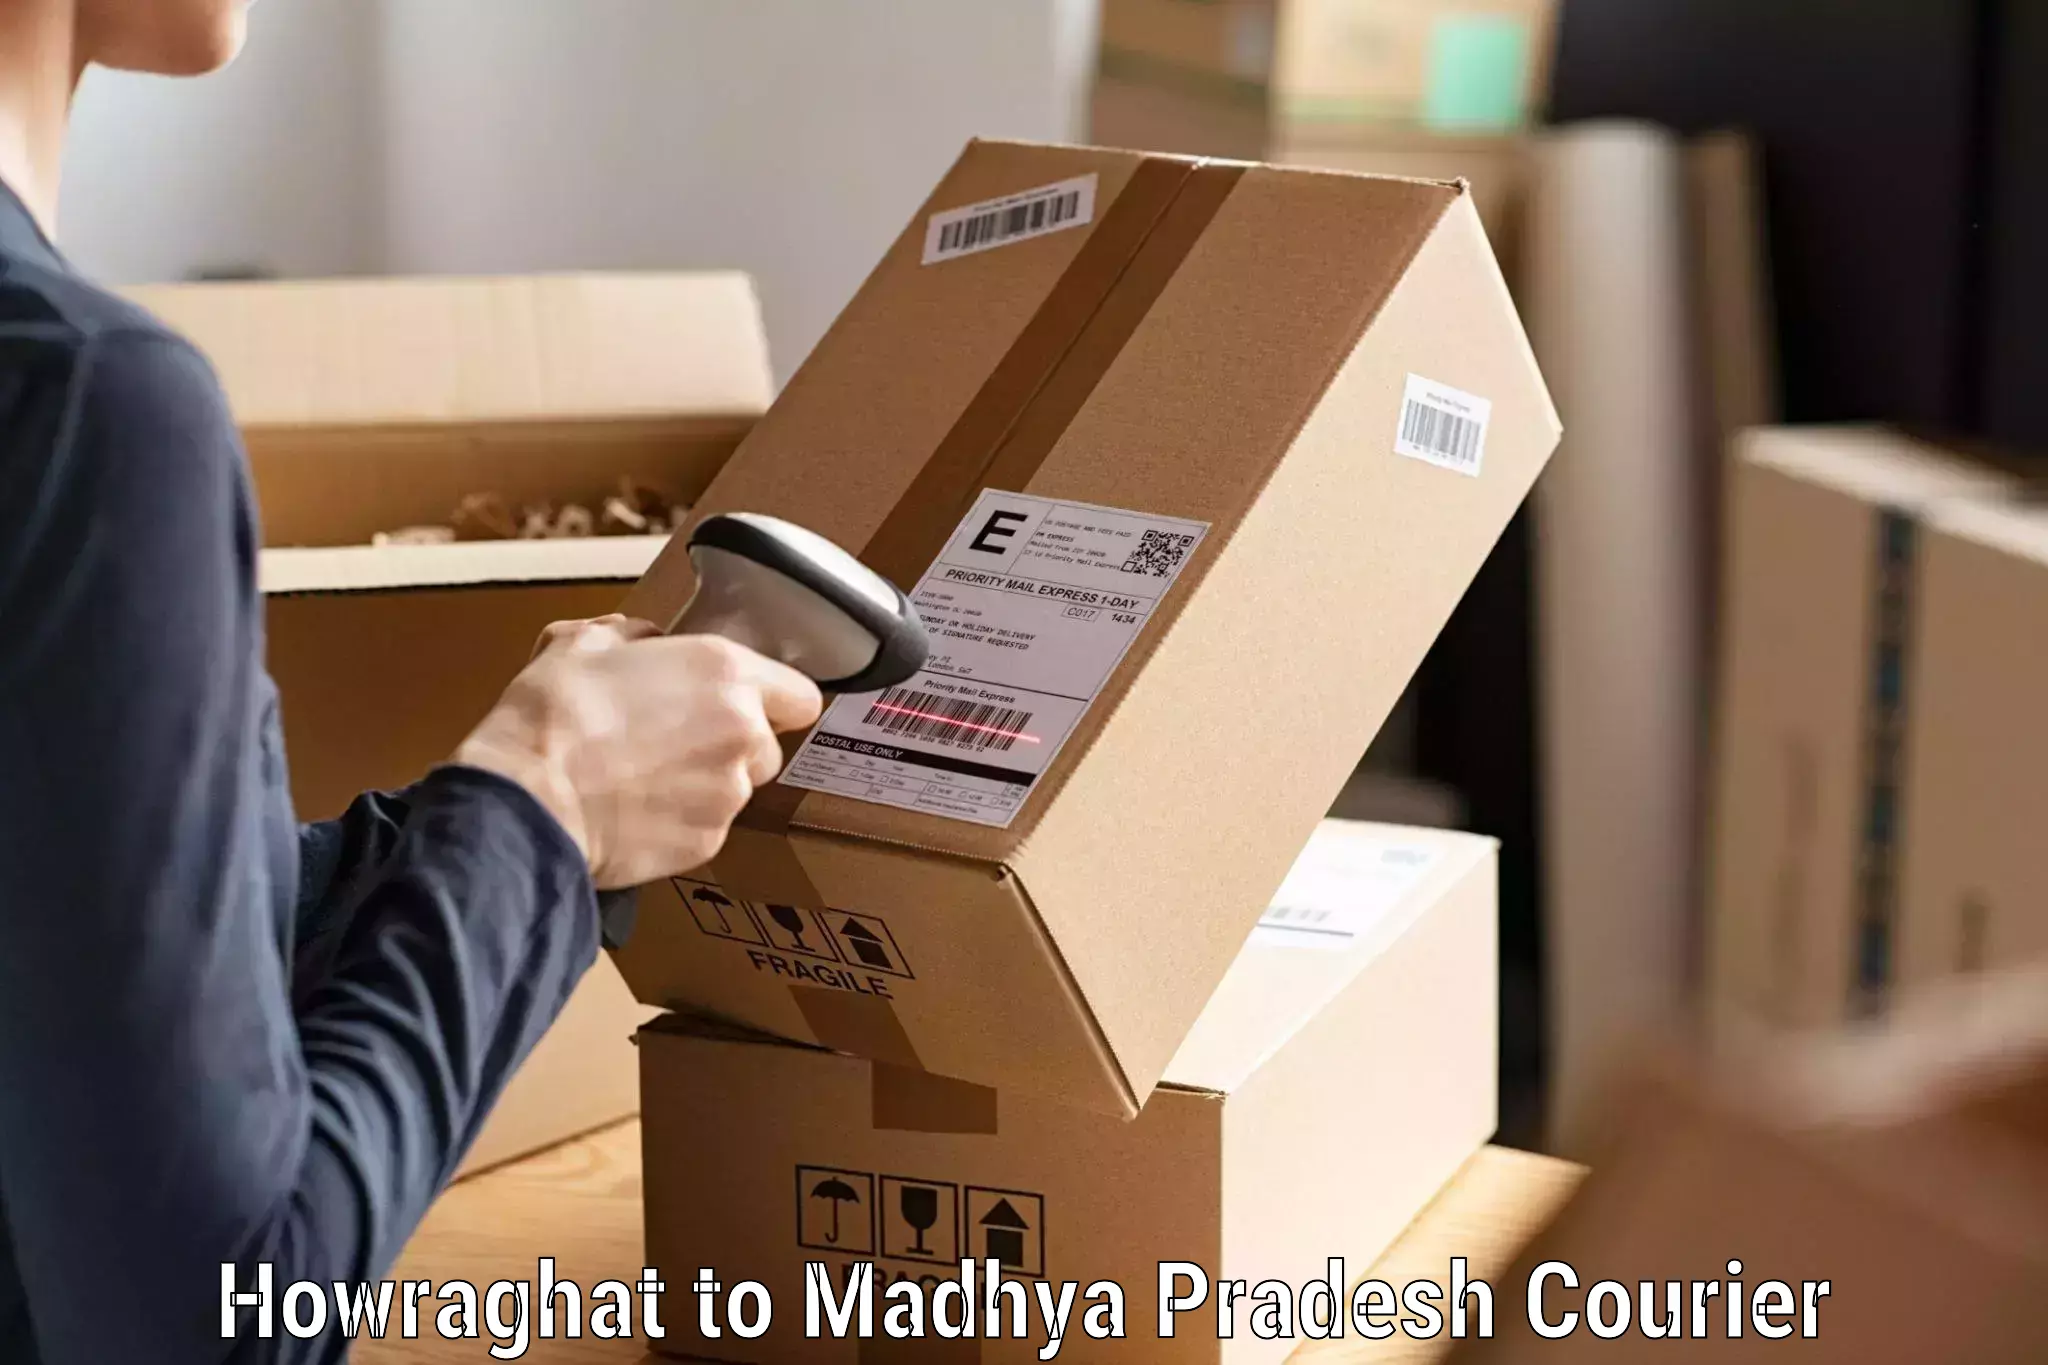 Courier service comparison Howraghat to Madhya Pradesh